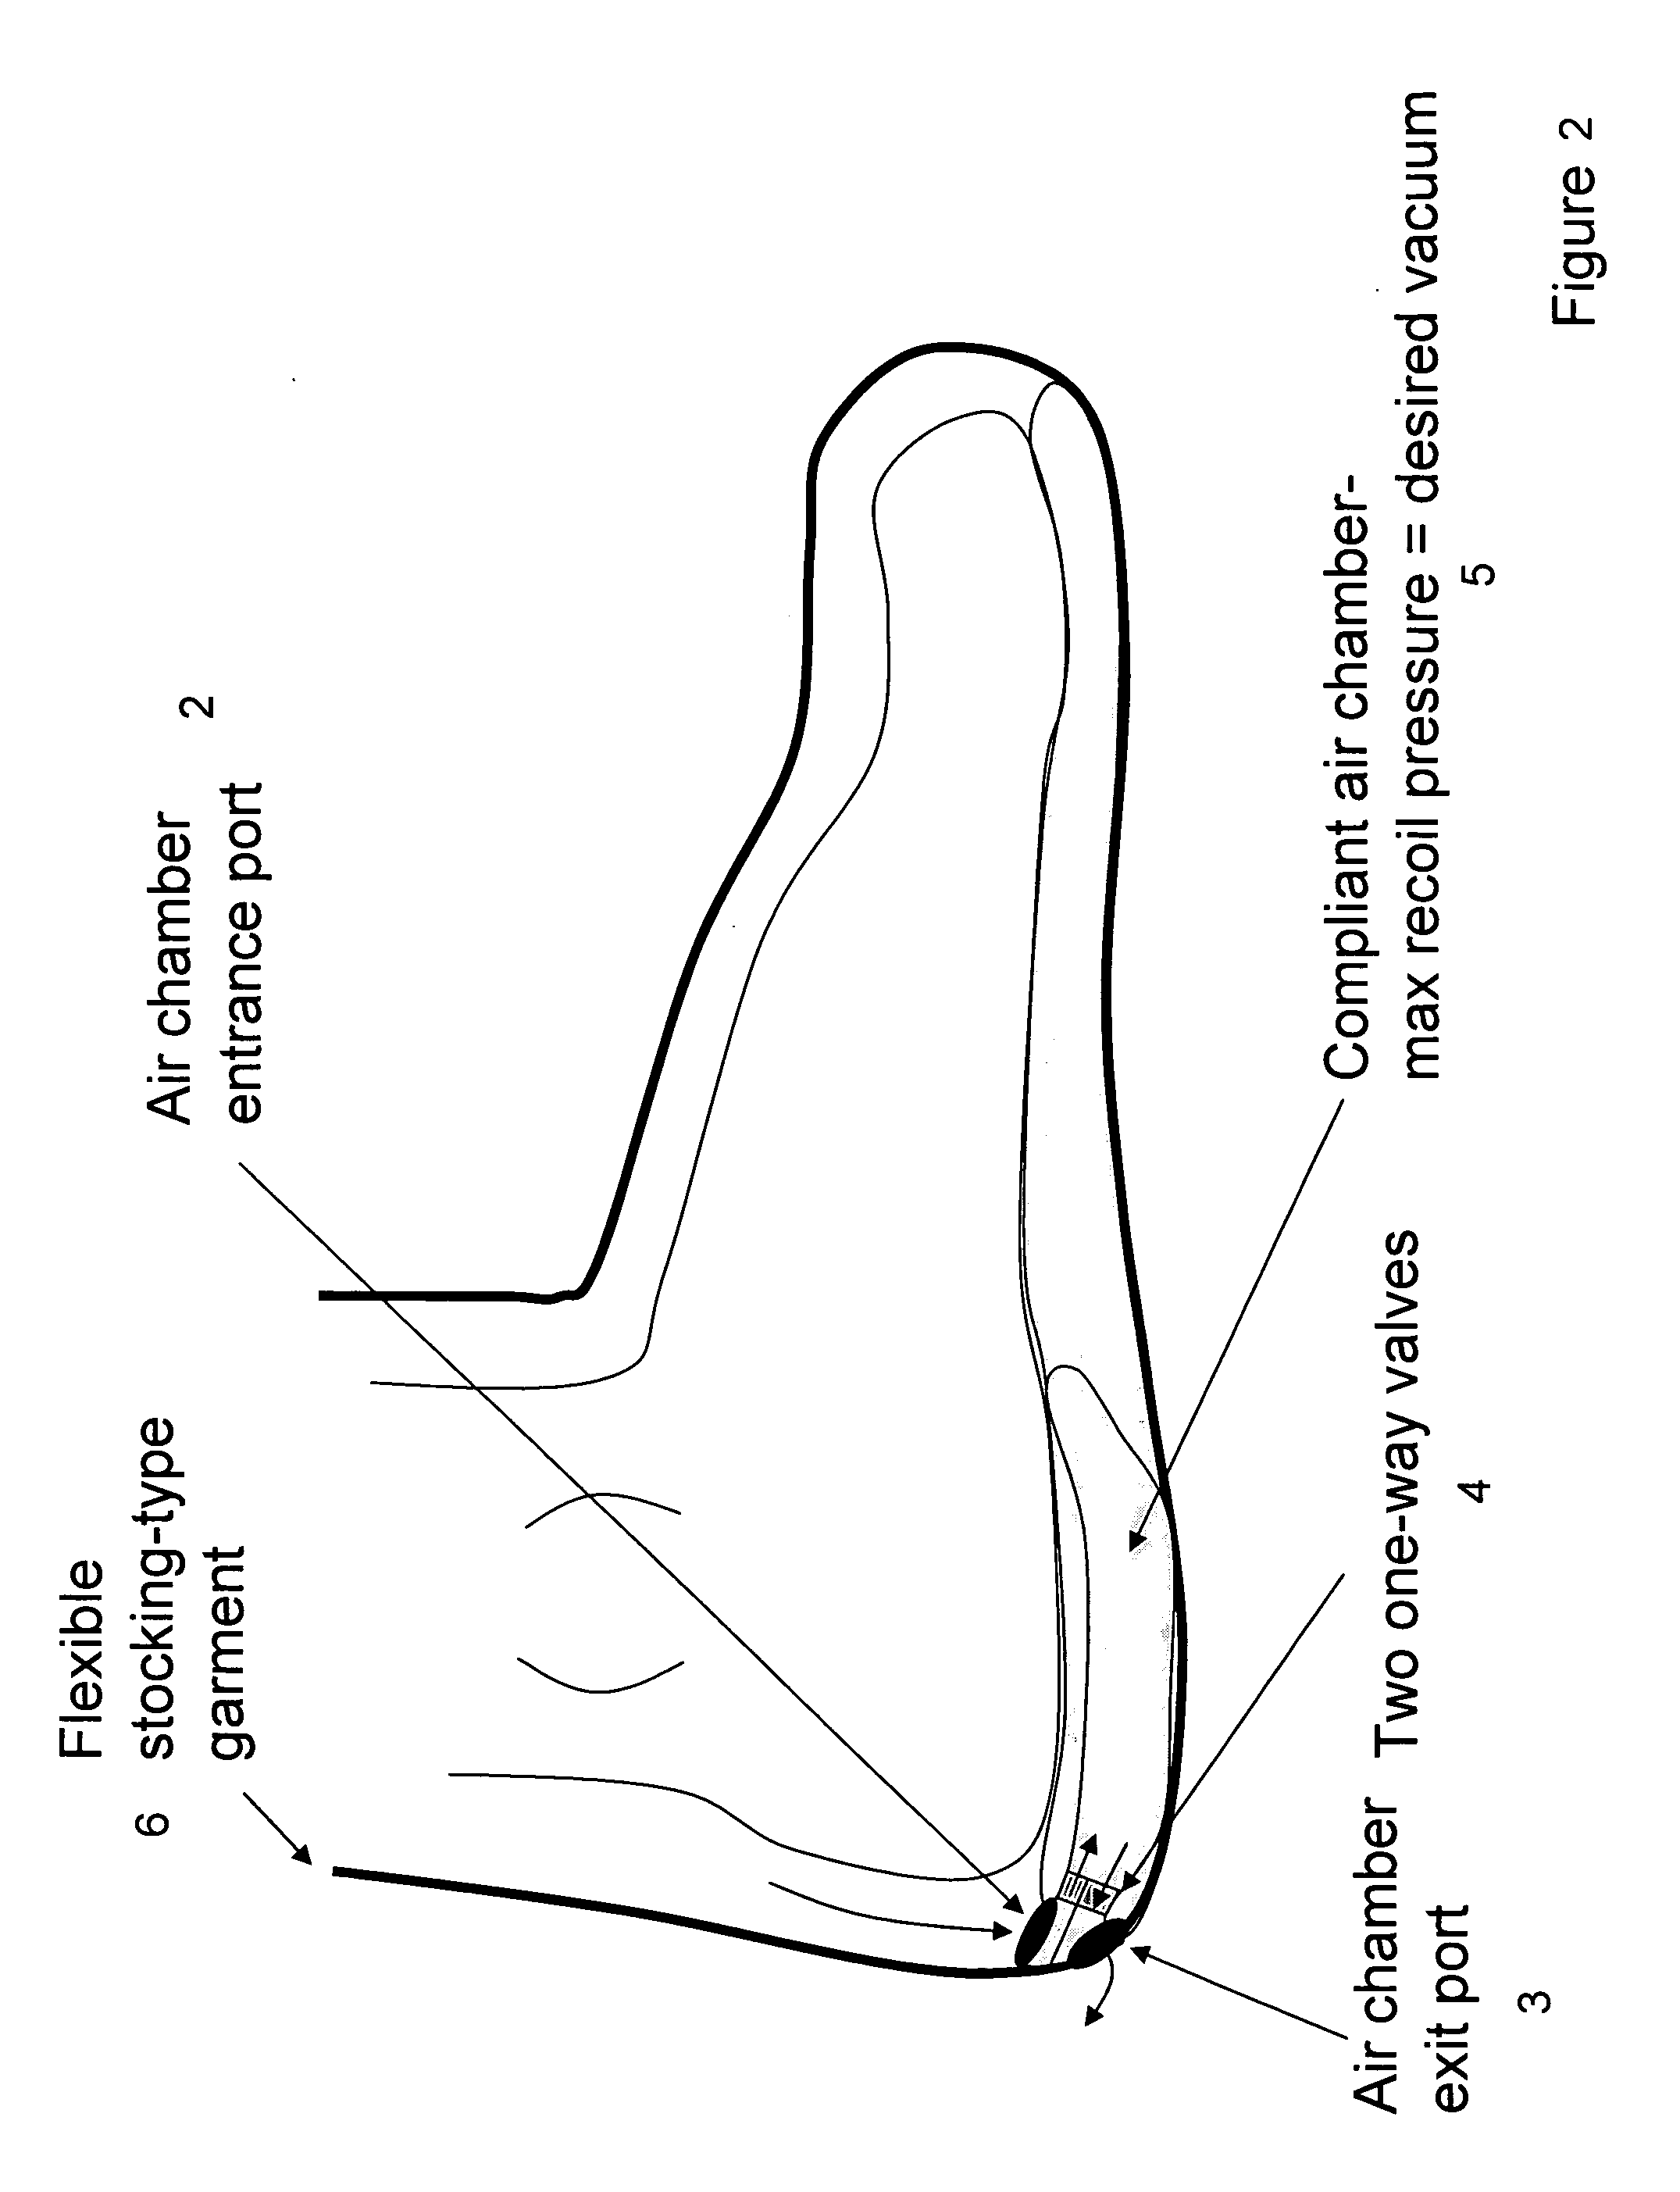 Method and apparatus for negative pressure therapy